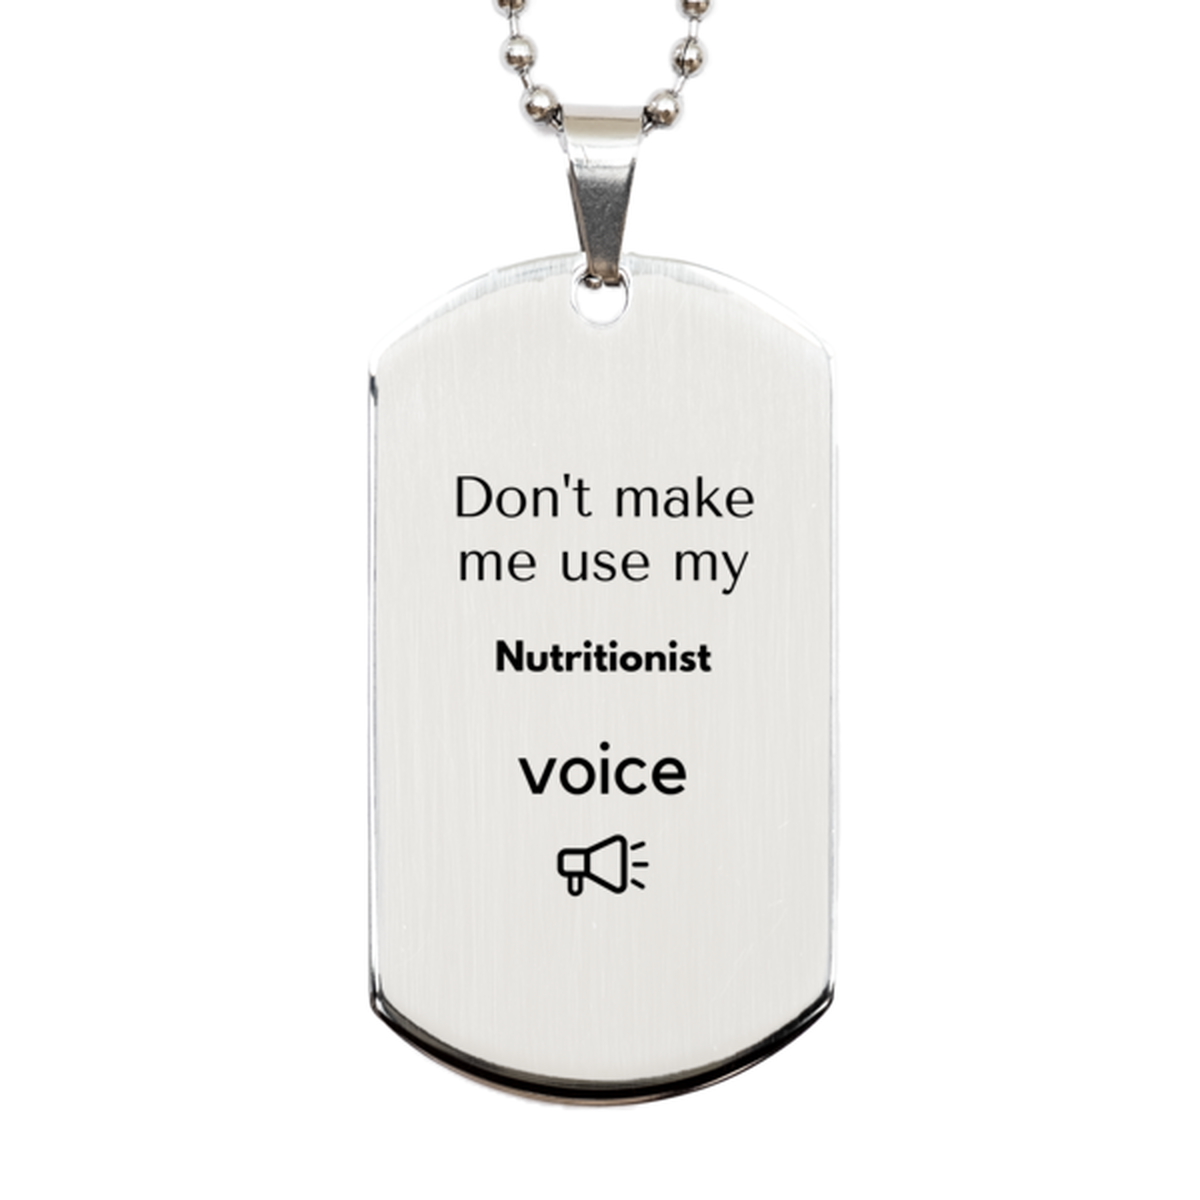 Don't make me use my Nutritionist voice, Sarcasm Nutritionist Gifts, Christmas Nutritionist Silver Dog Tag Birthday Unique Gifts For Nutritionist Coworkers, Men, Women, Colleague, Friends